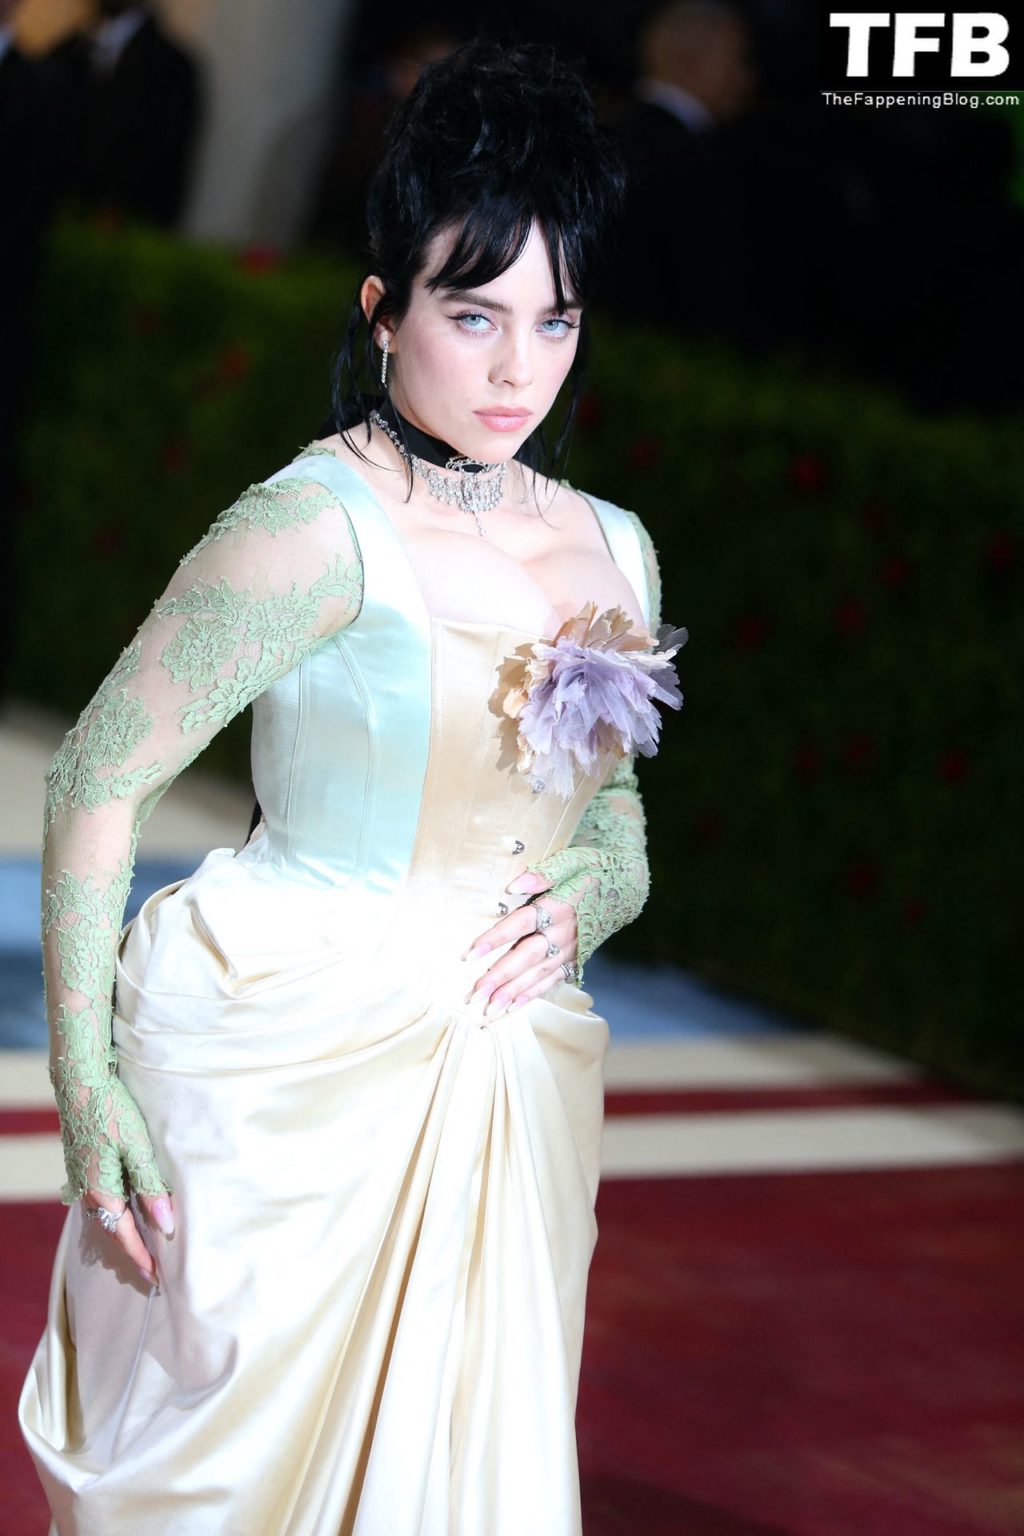 Billie Eilish Sexy The Fappening Blog 11 1024x1536 - Billie Eilish Showcases Nice Cleavage at The 2022 Met Gala in NYC (155 Photos)